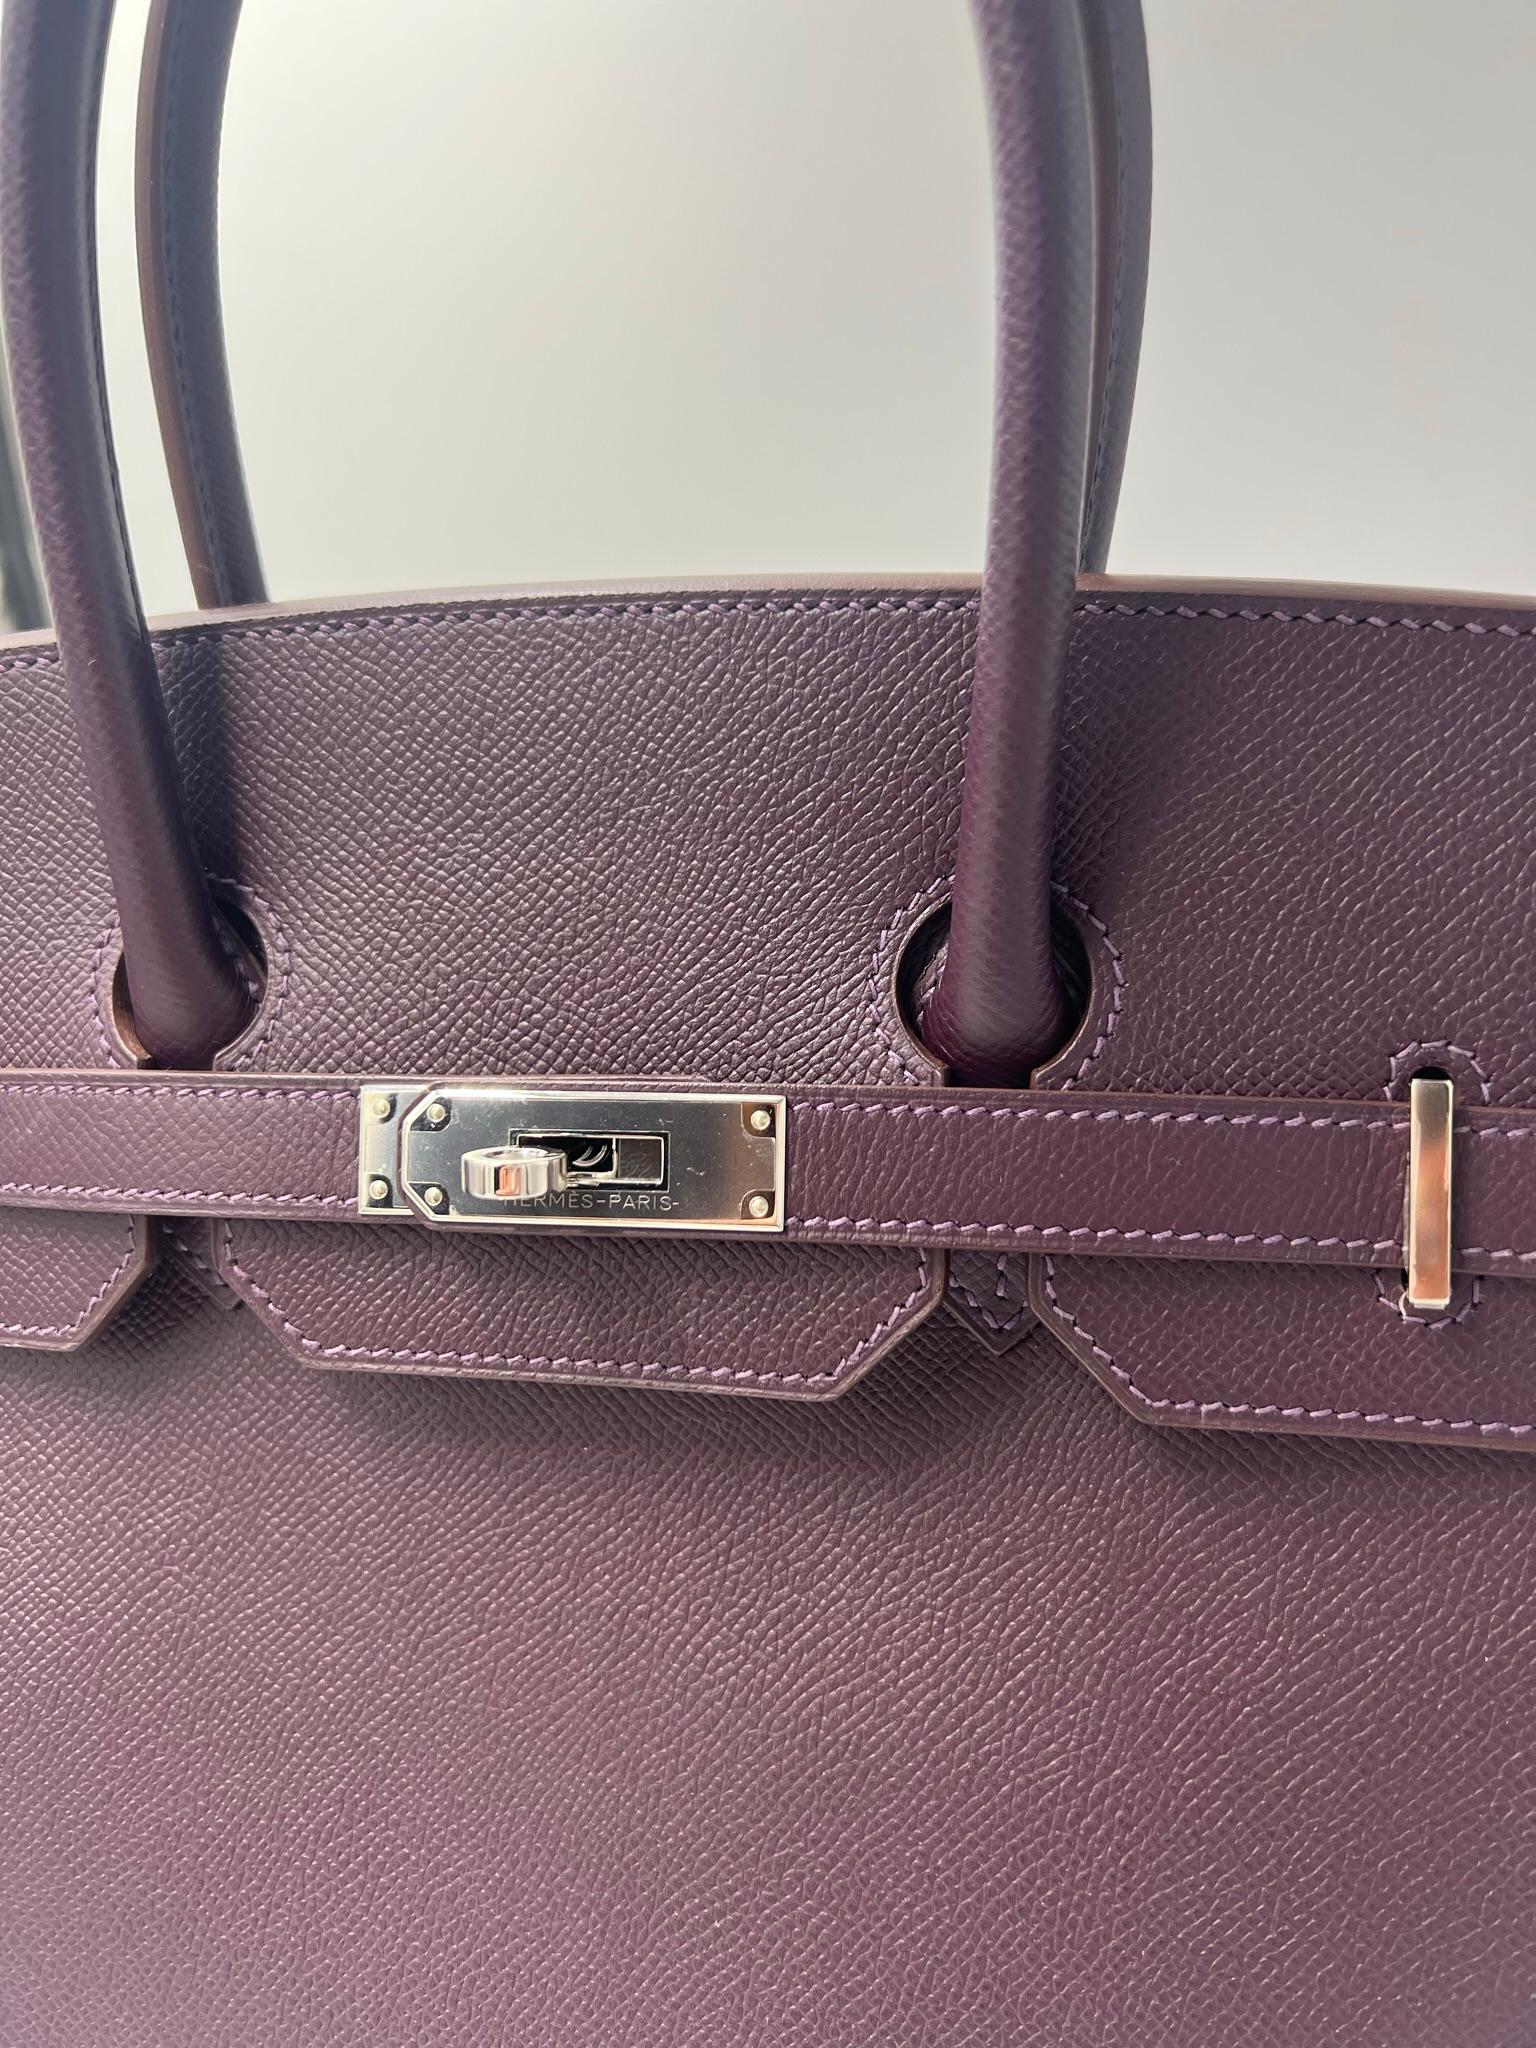 Hermes Birkin 35 bag Special order in Epsom leather and Palladium Hardware, Prune color with purple stitching. All sealed hardware. Comes with clochette, lock and keys and dustbag. A stamp, kept unused